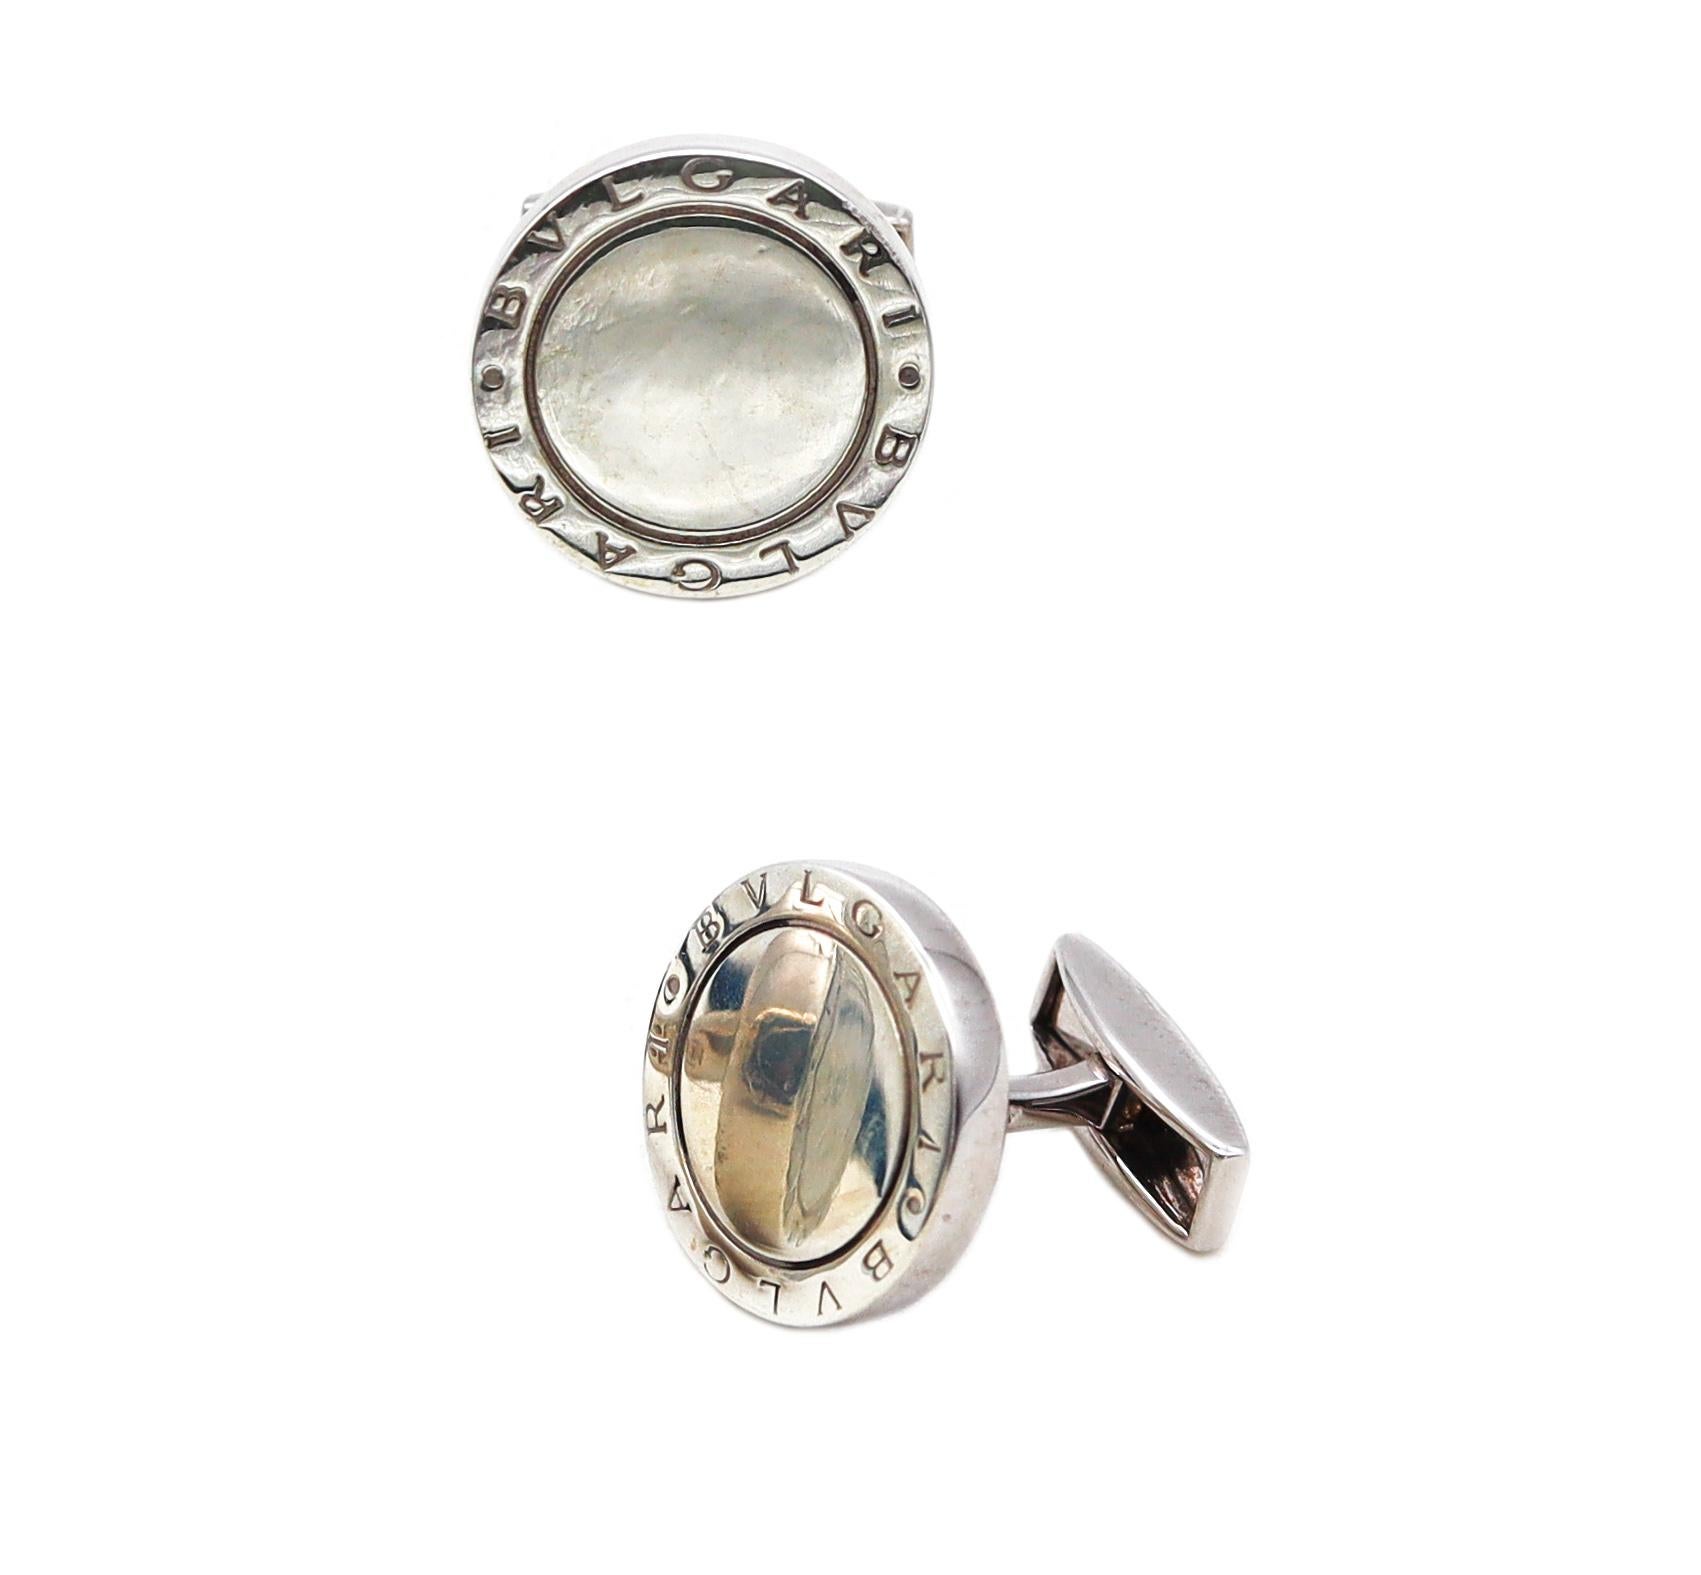 Pair of round cufflinks designed by Bvlgari.

Beautiful sleek pieces, made in Rome Italy by the house of Bvlgari. These elegant round cufflinks has been crafted in solid .925/.999 sterling silver featuring the double name of Bvlgari and suited with